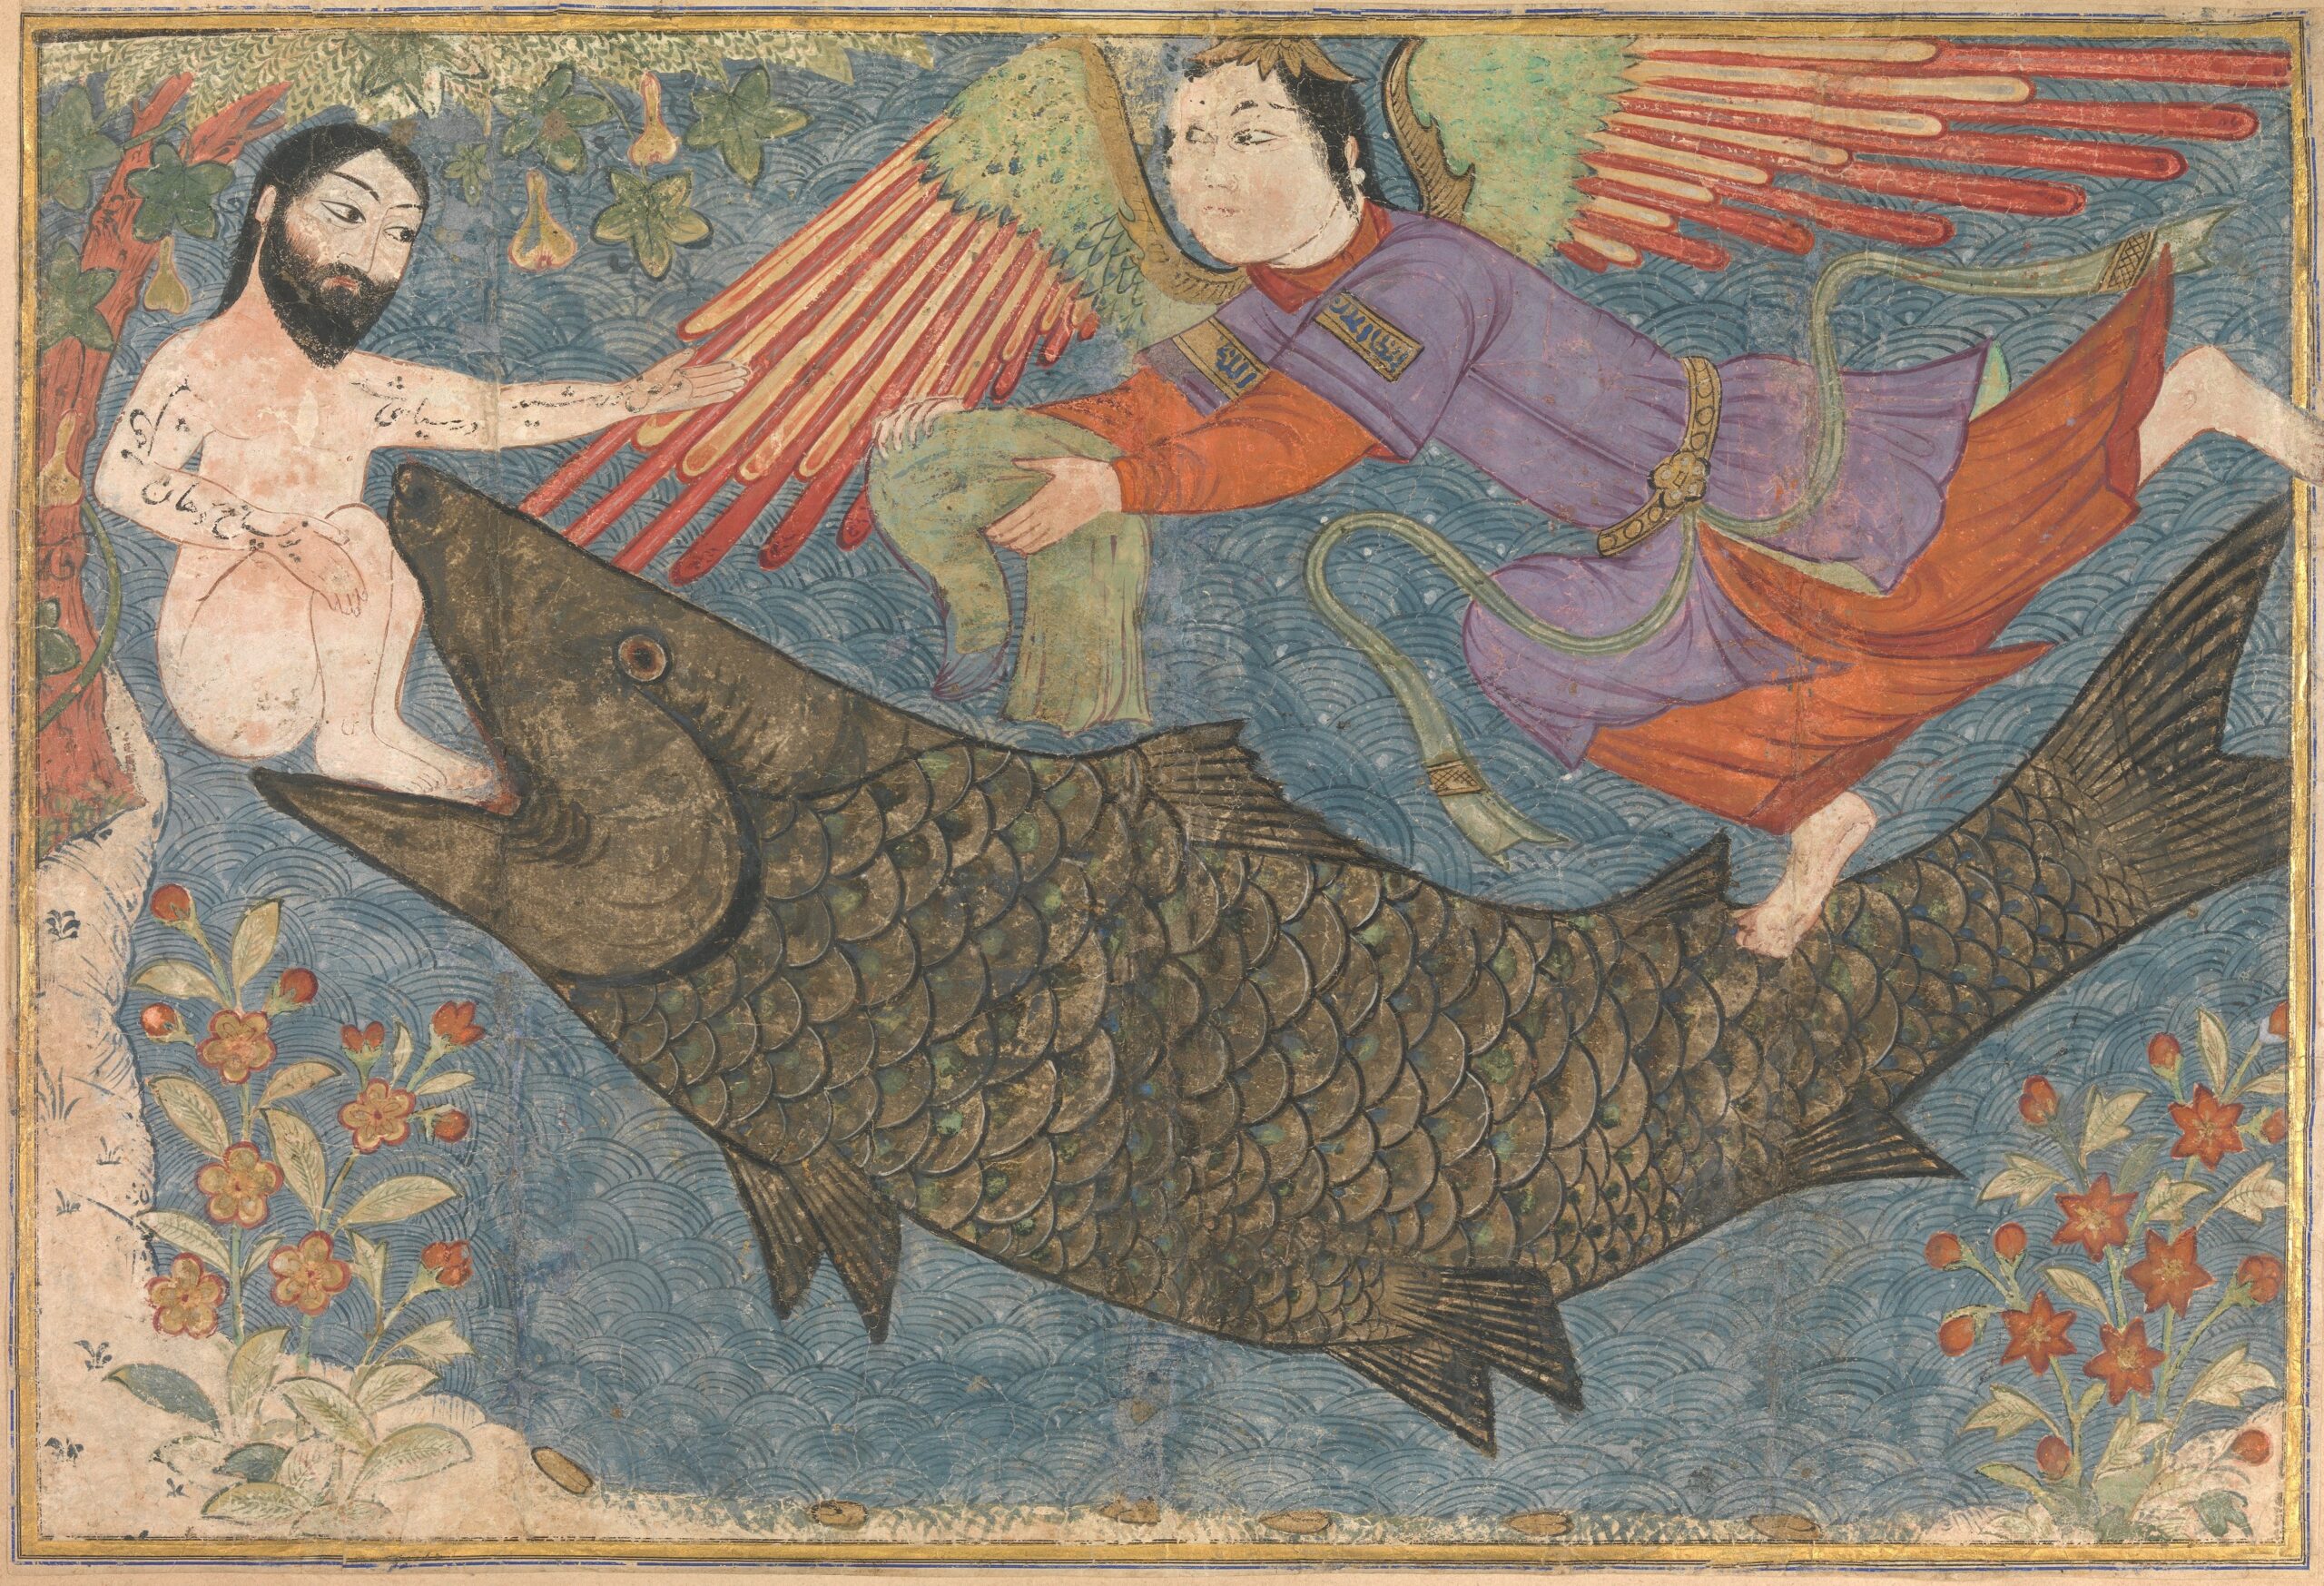 Jonah and the Whale from a Jami al-Tavarikh